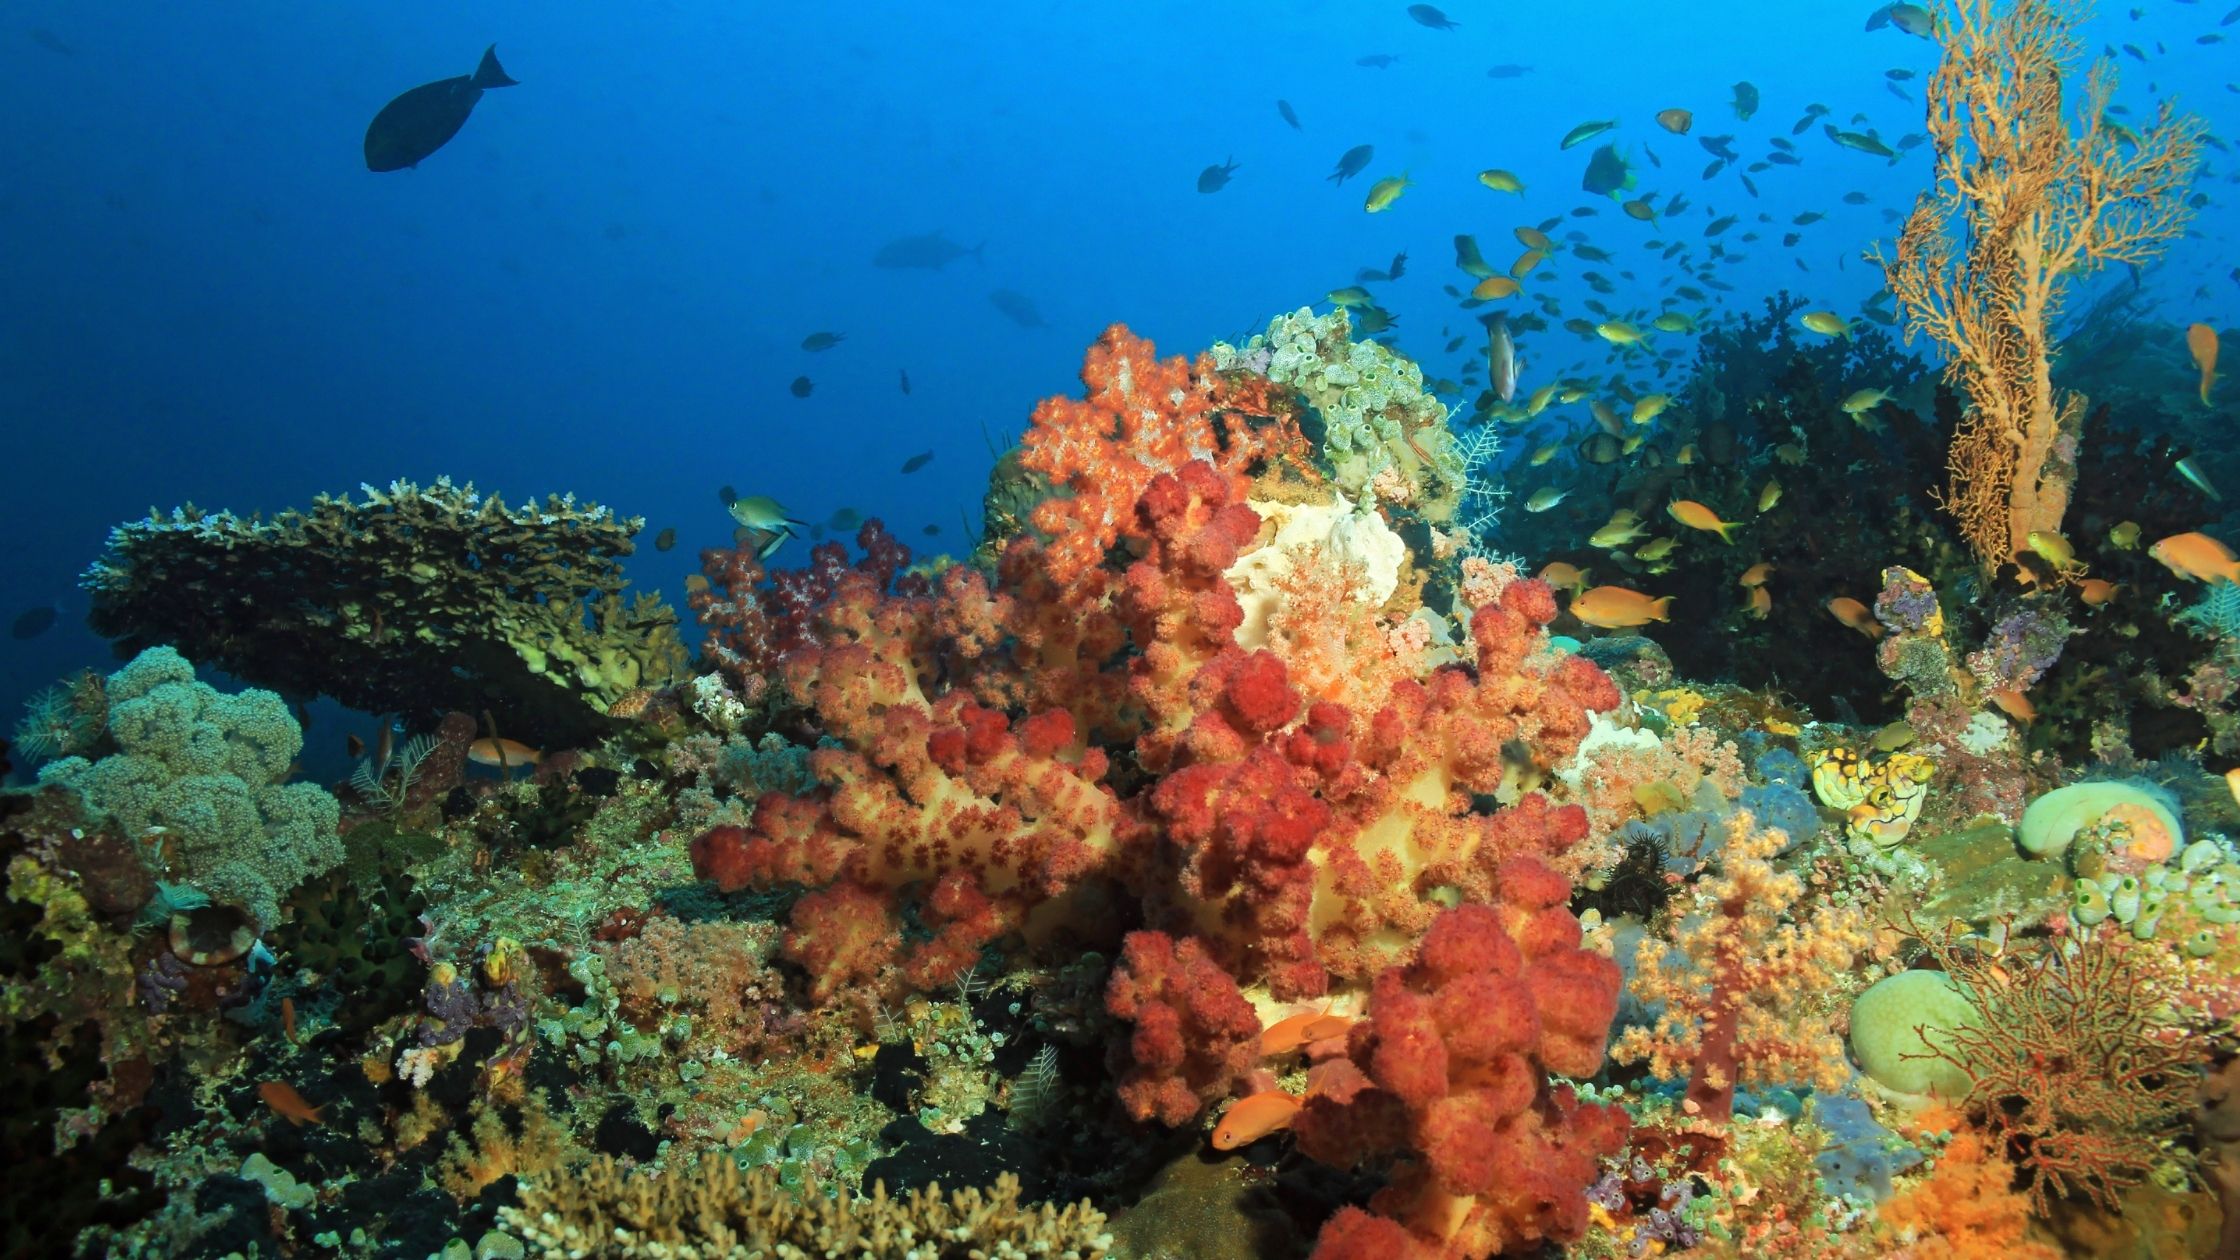 A picture of coral in the Raja Ampat reef.